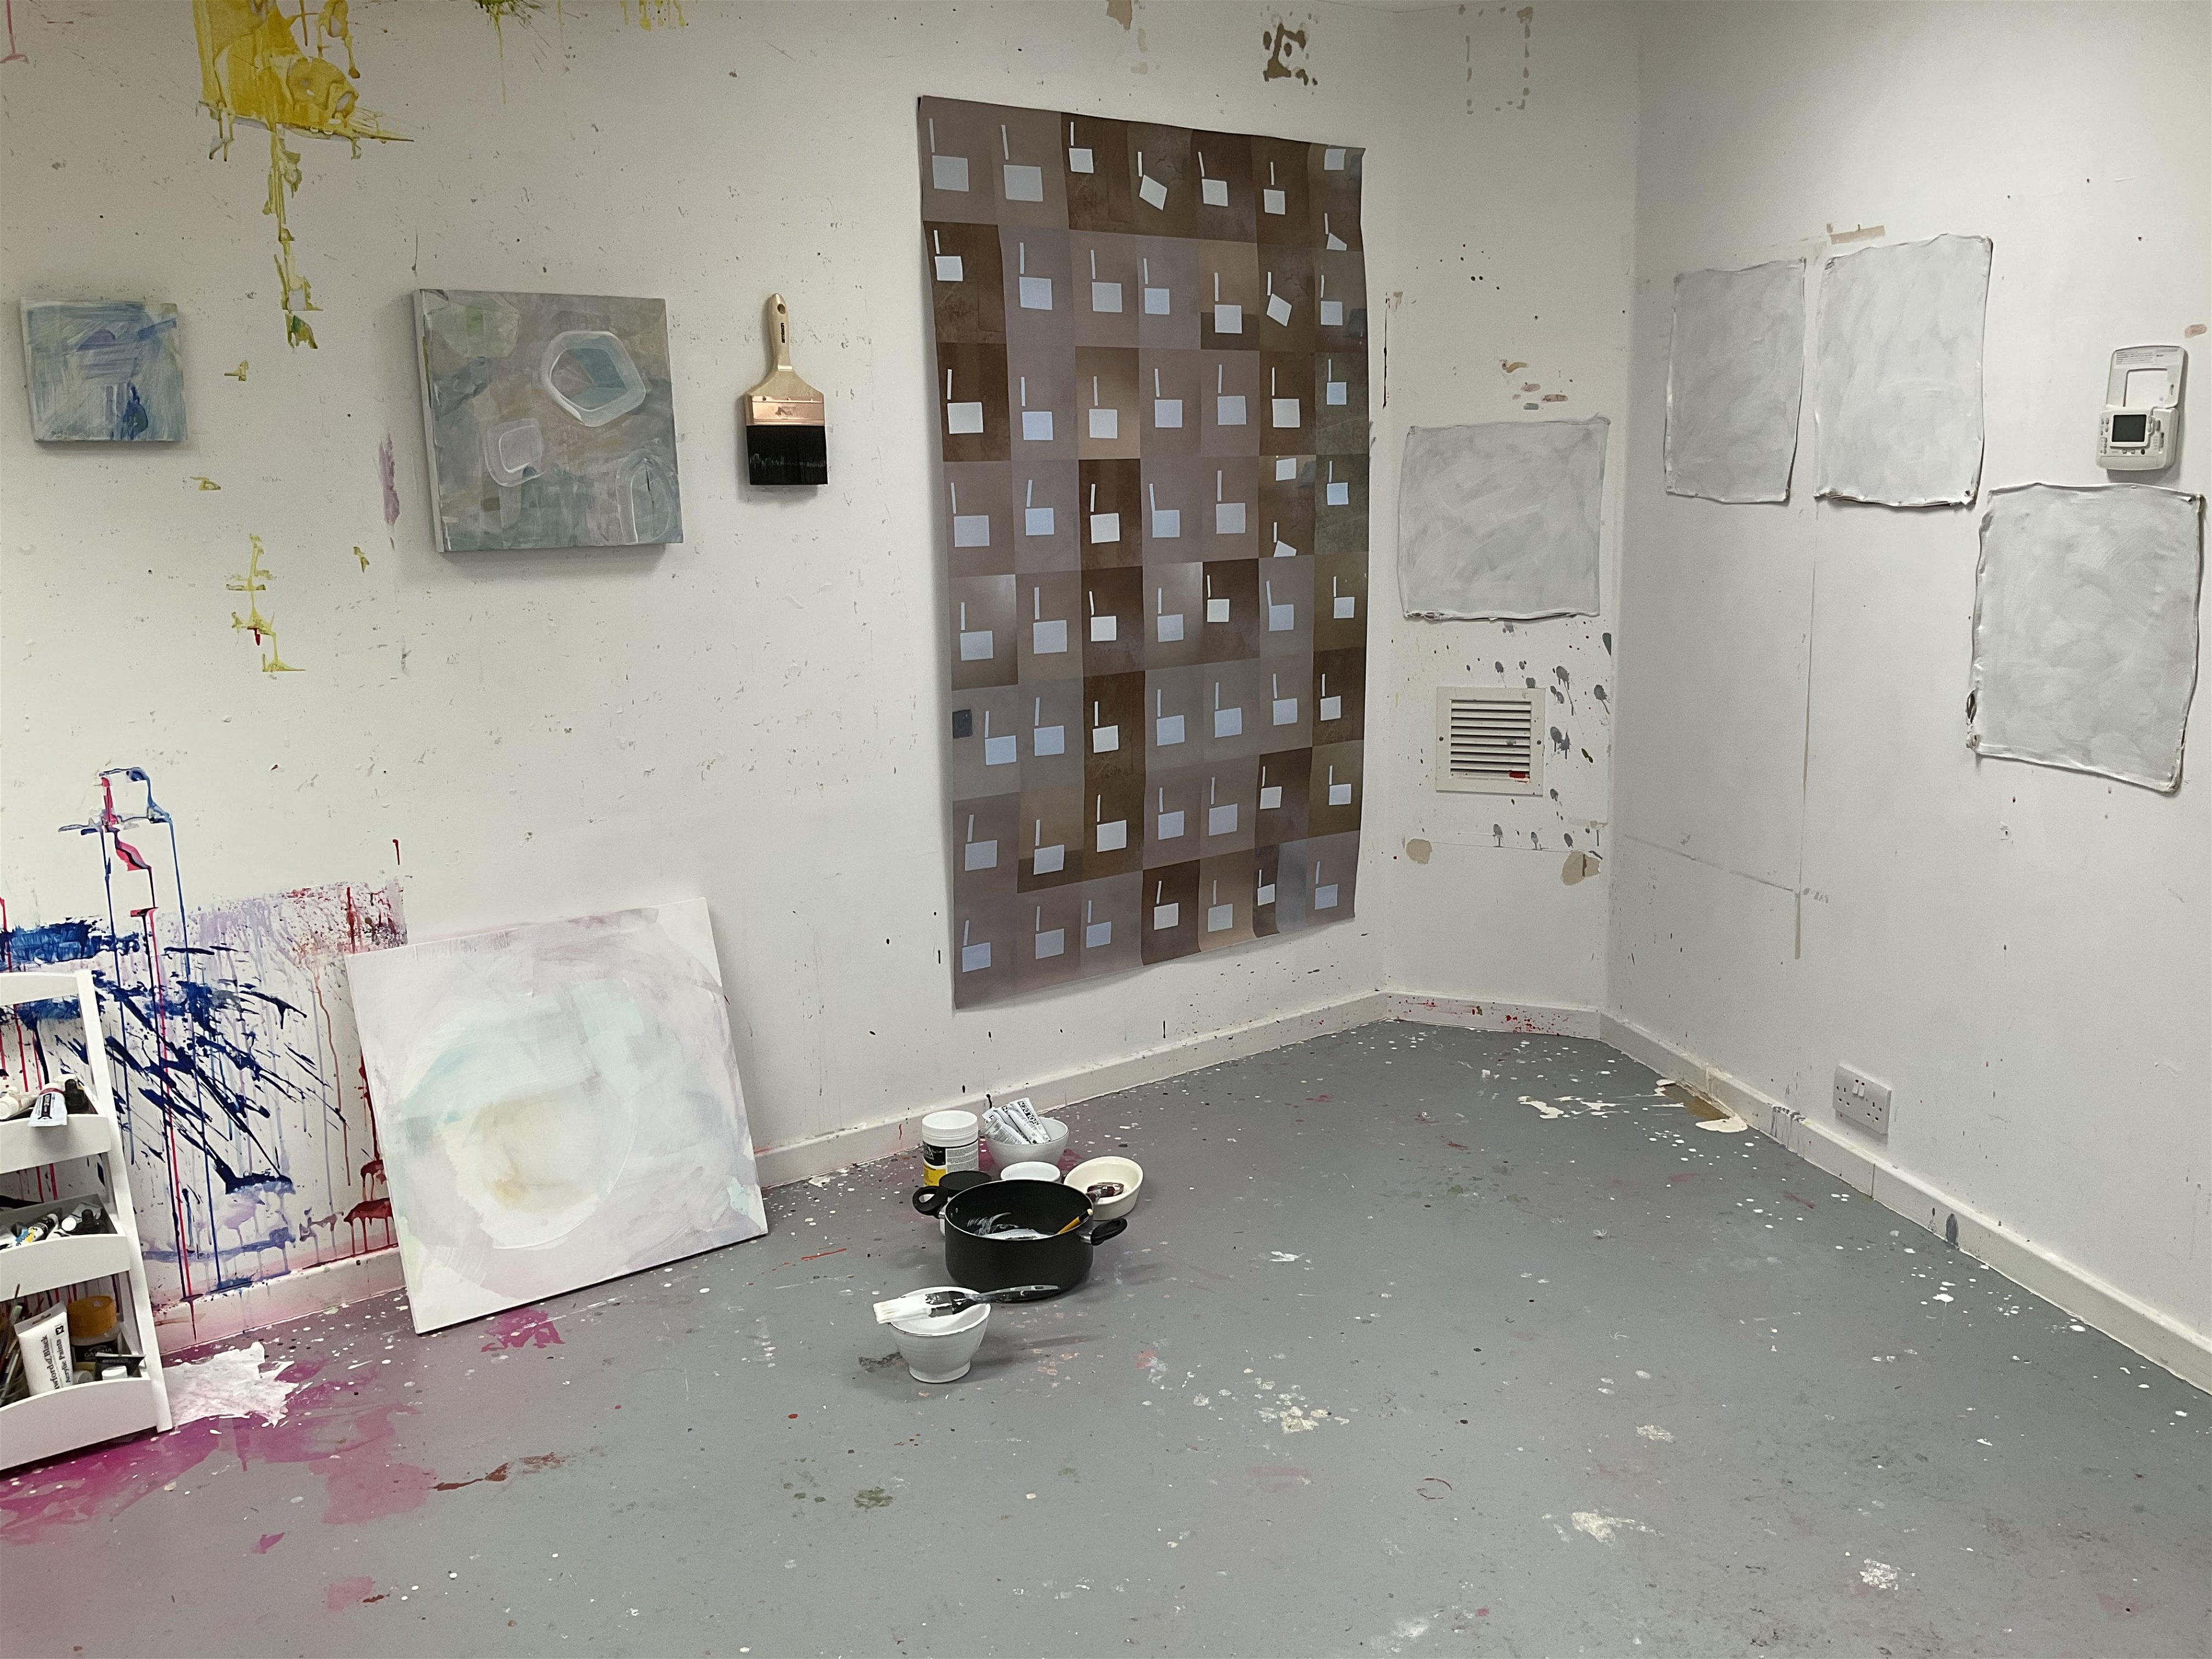 Bespoke Private Studio Session: Painting